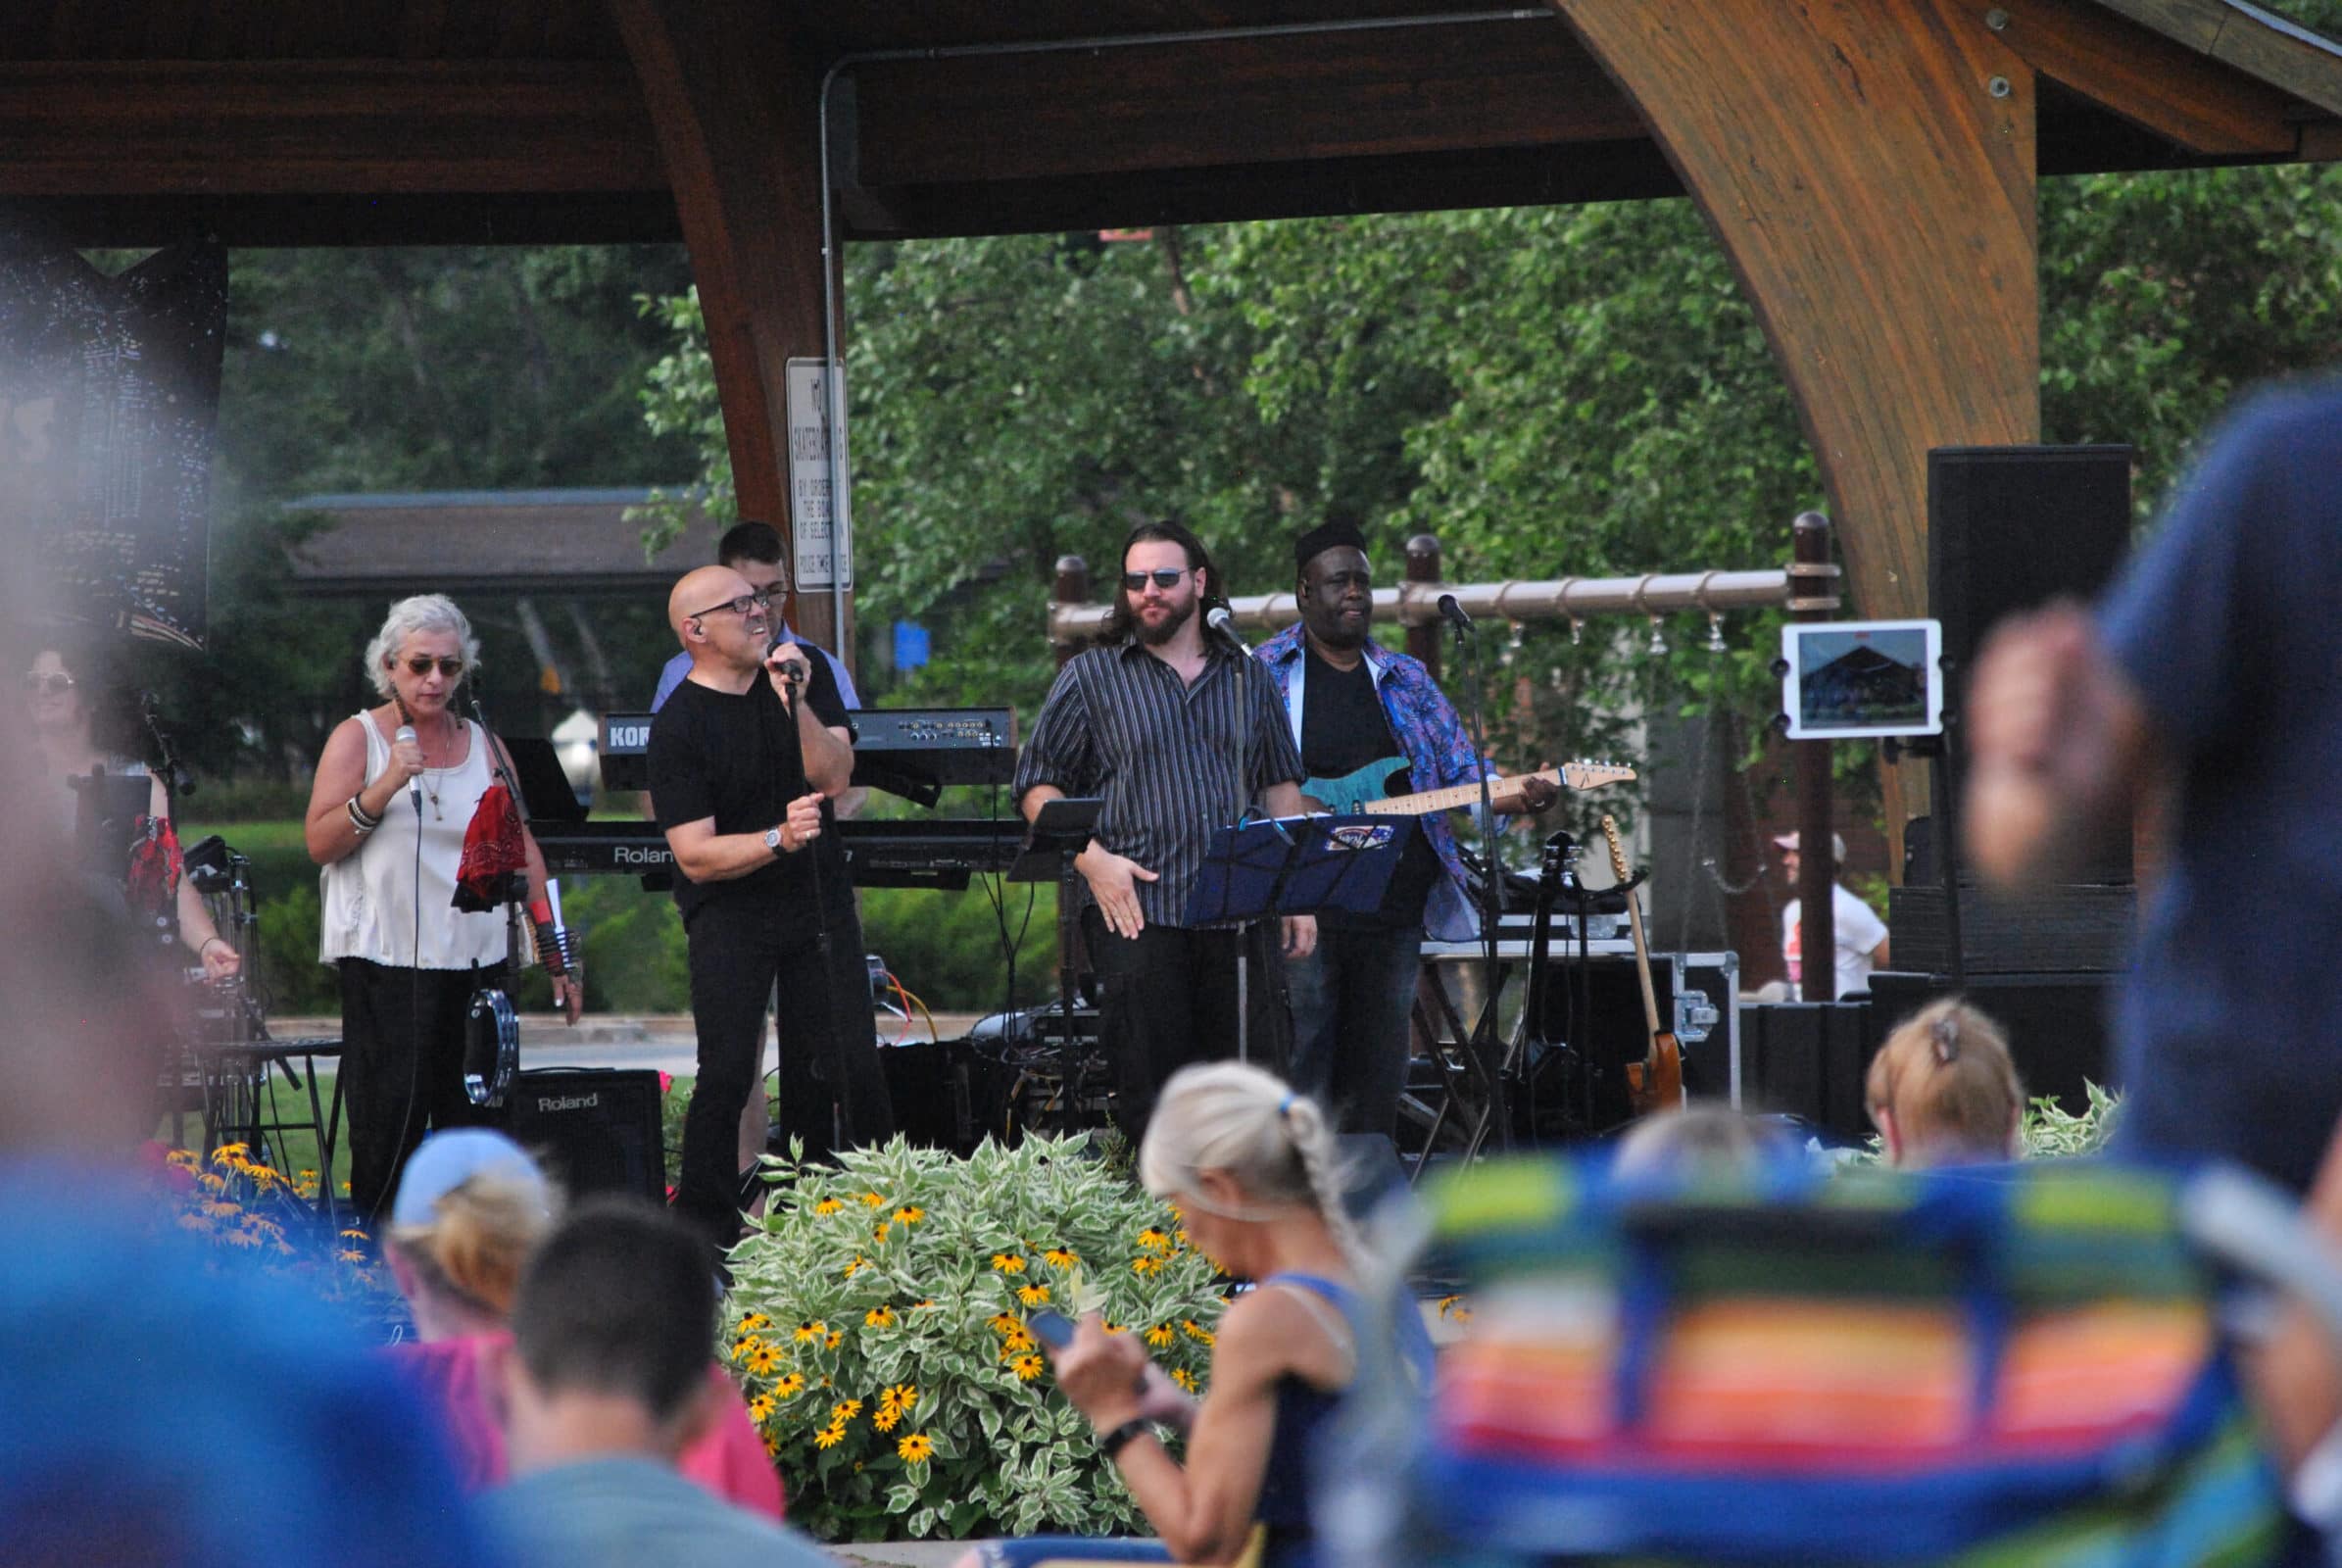 Concert attendees enjoy a performance of the Midtown Horns as part of Westborough’s Summer Concert Series on Aug. 10.